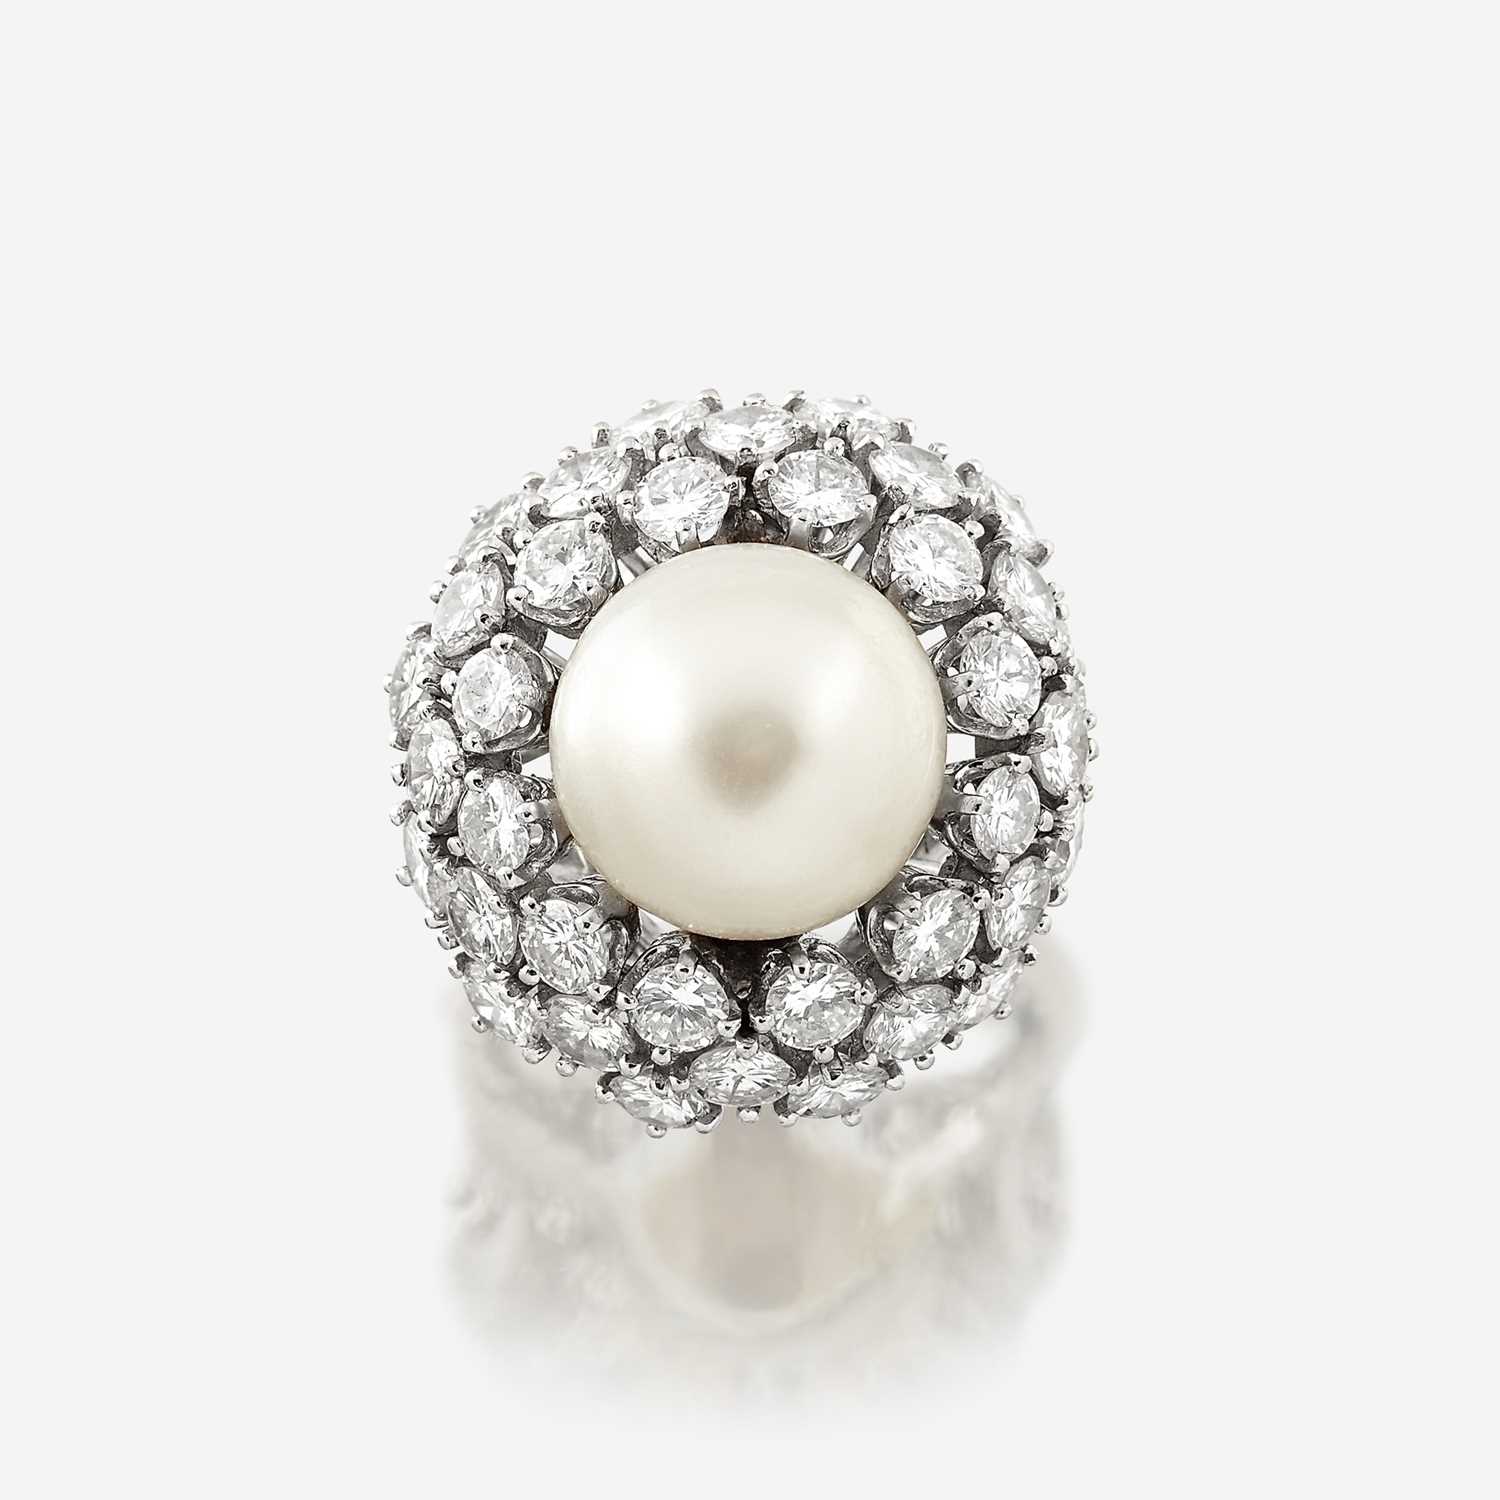 Lot 172 - A cultured pearl, diamond, and eighteen karat white gold ring